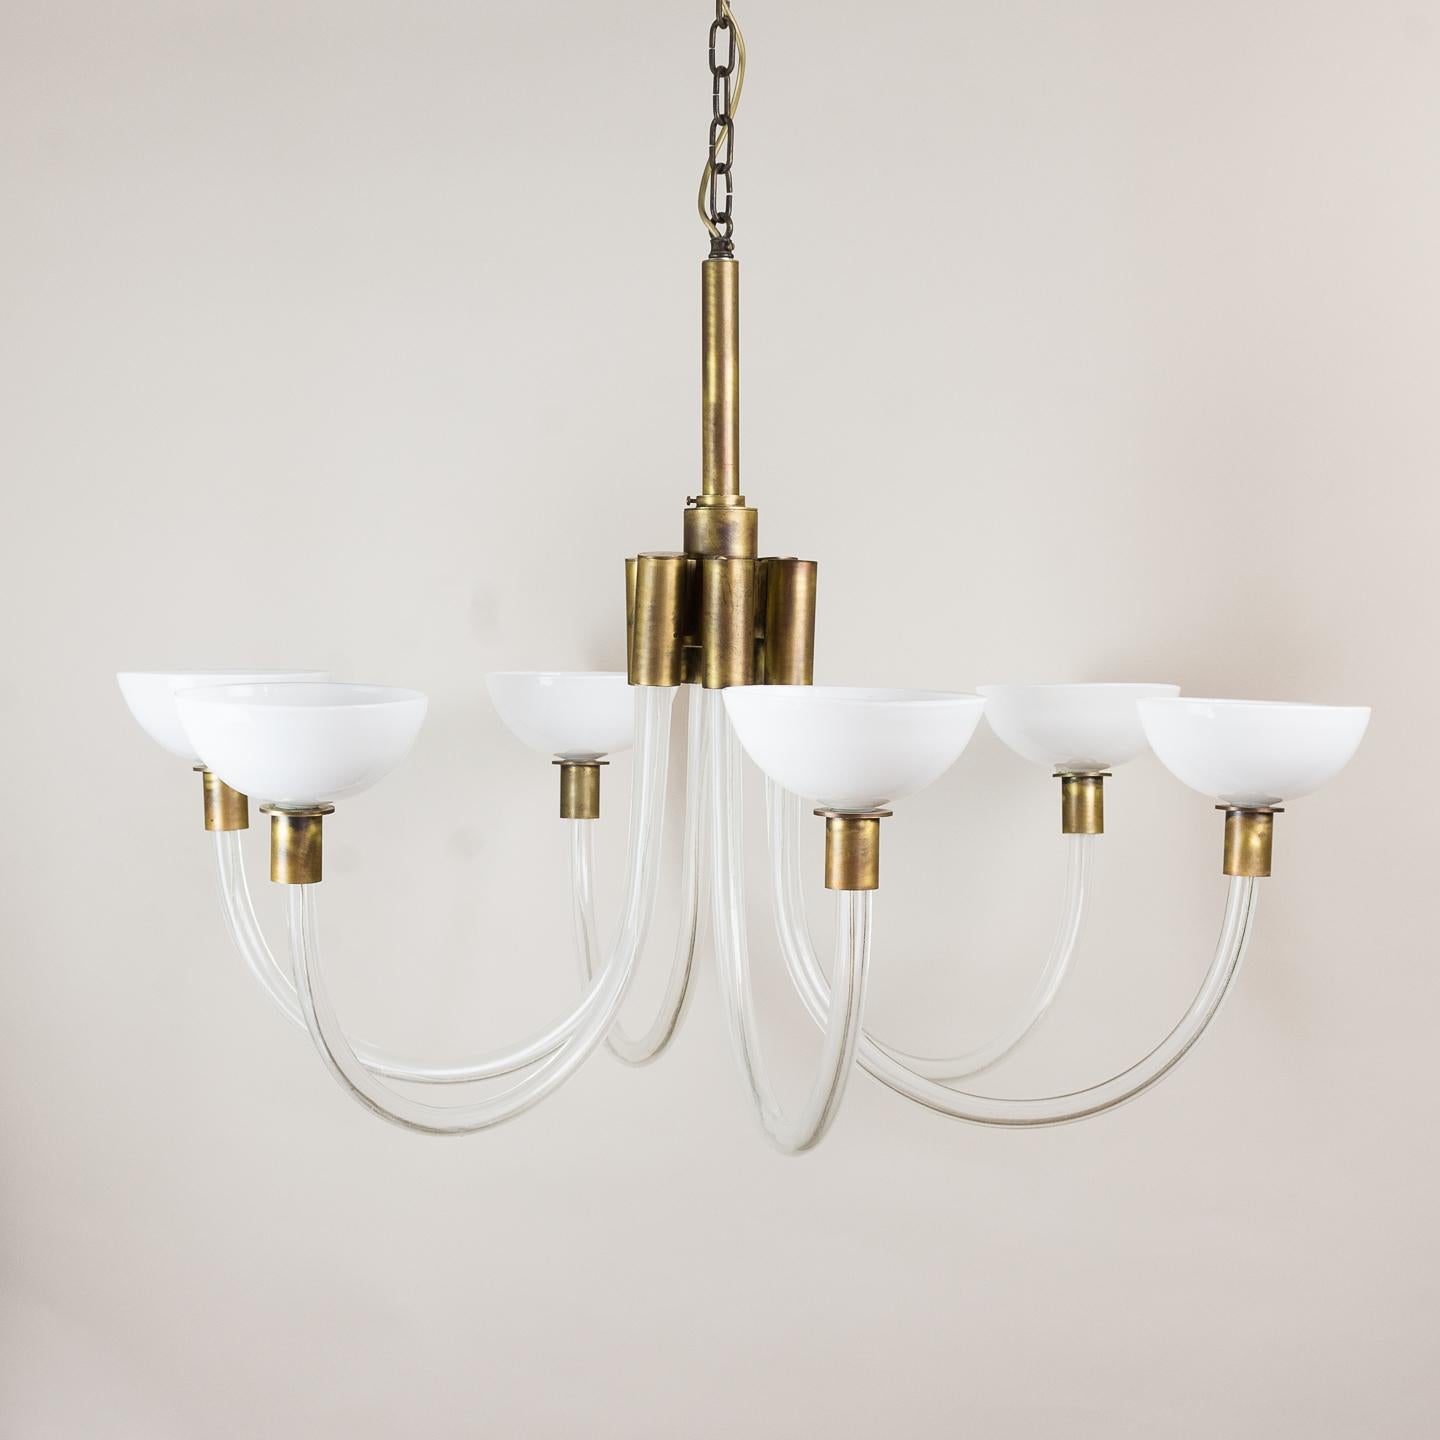 Midcentury glass and brass Italian chandelier, in the 1950s style, the six curved glass arms with brass collars and opal glass shades issuing from central brass stem. Five available, sold individually.